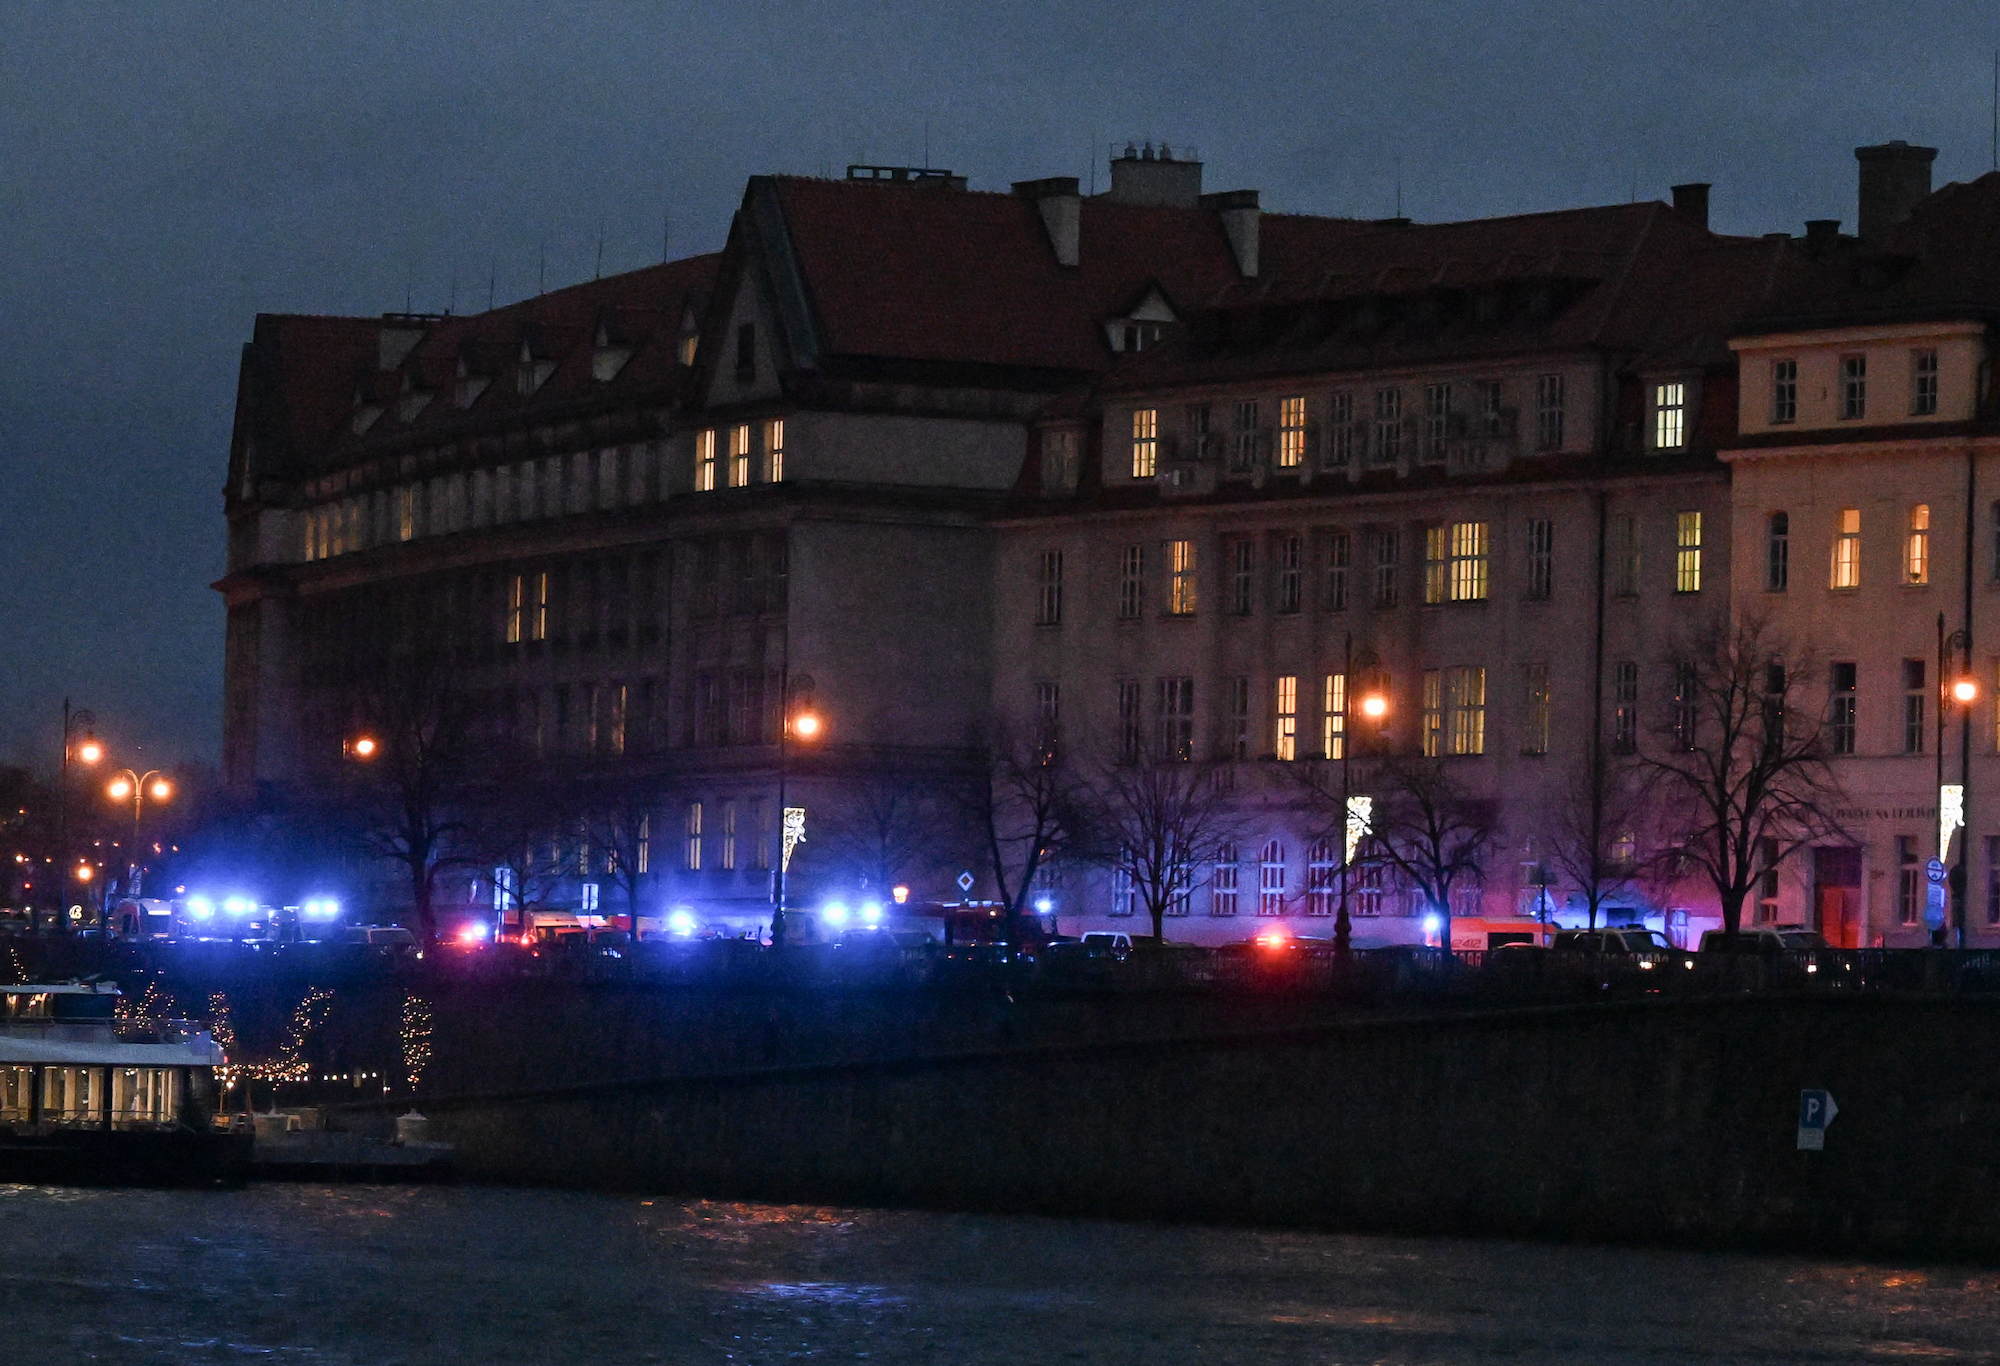 Lights from emergency vehicles are seen along the bank of river Moldau by Charles University in Prague on Thursday.